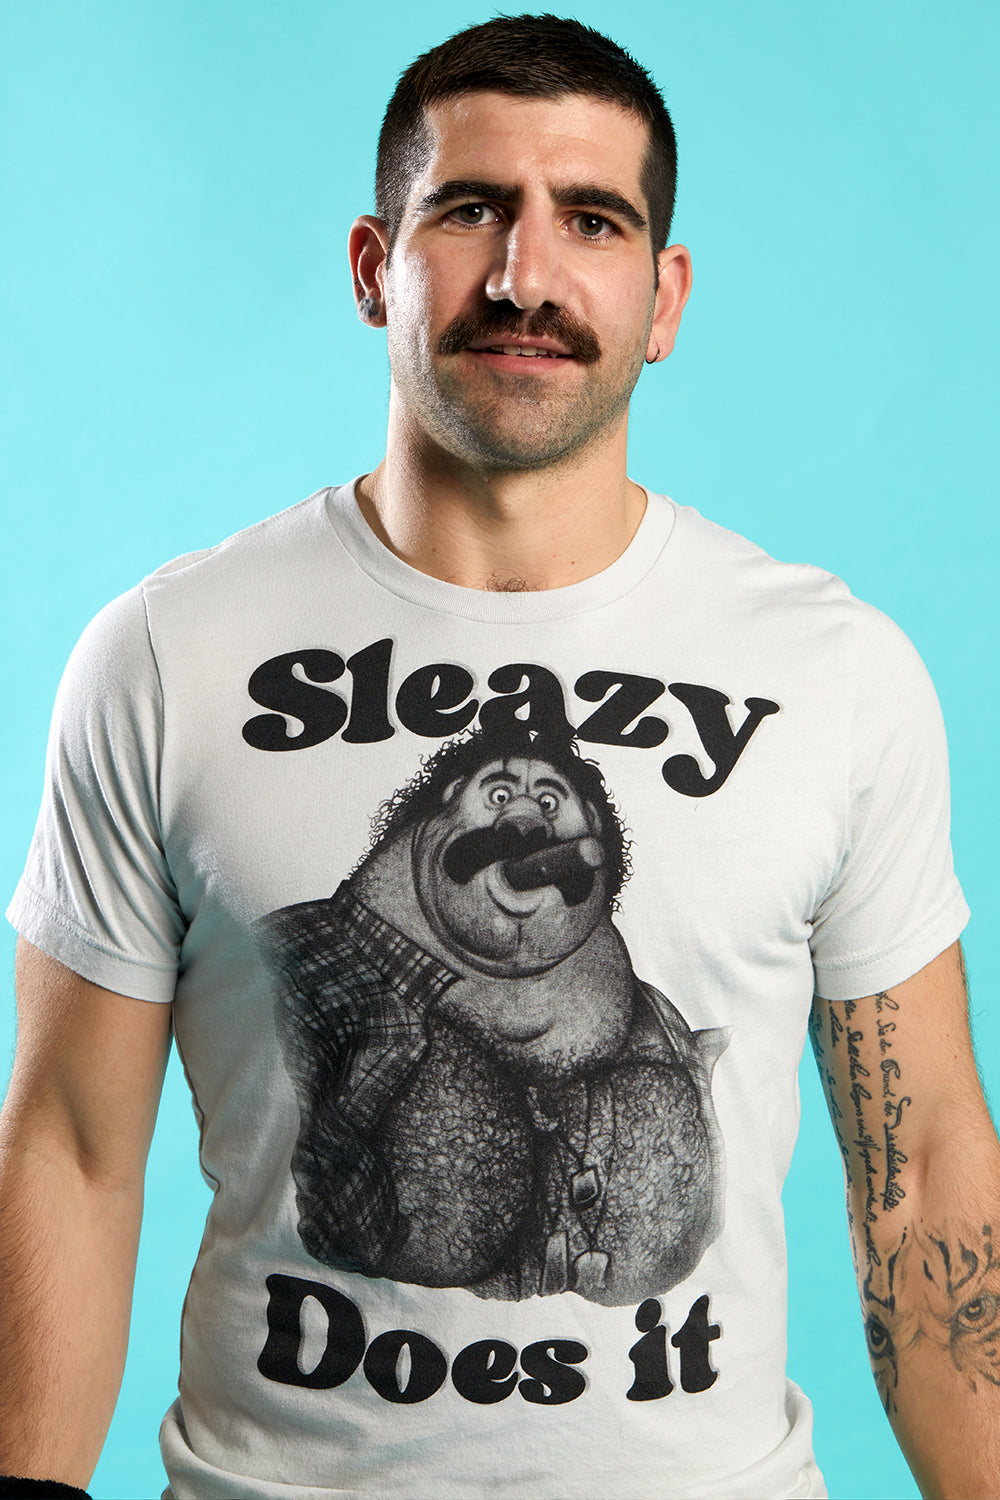 Sleazy Does It Tee Shirt - Slick It Up 